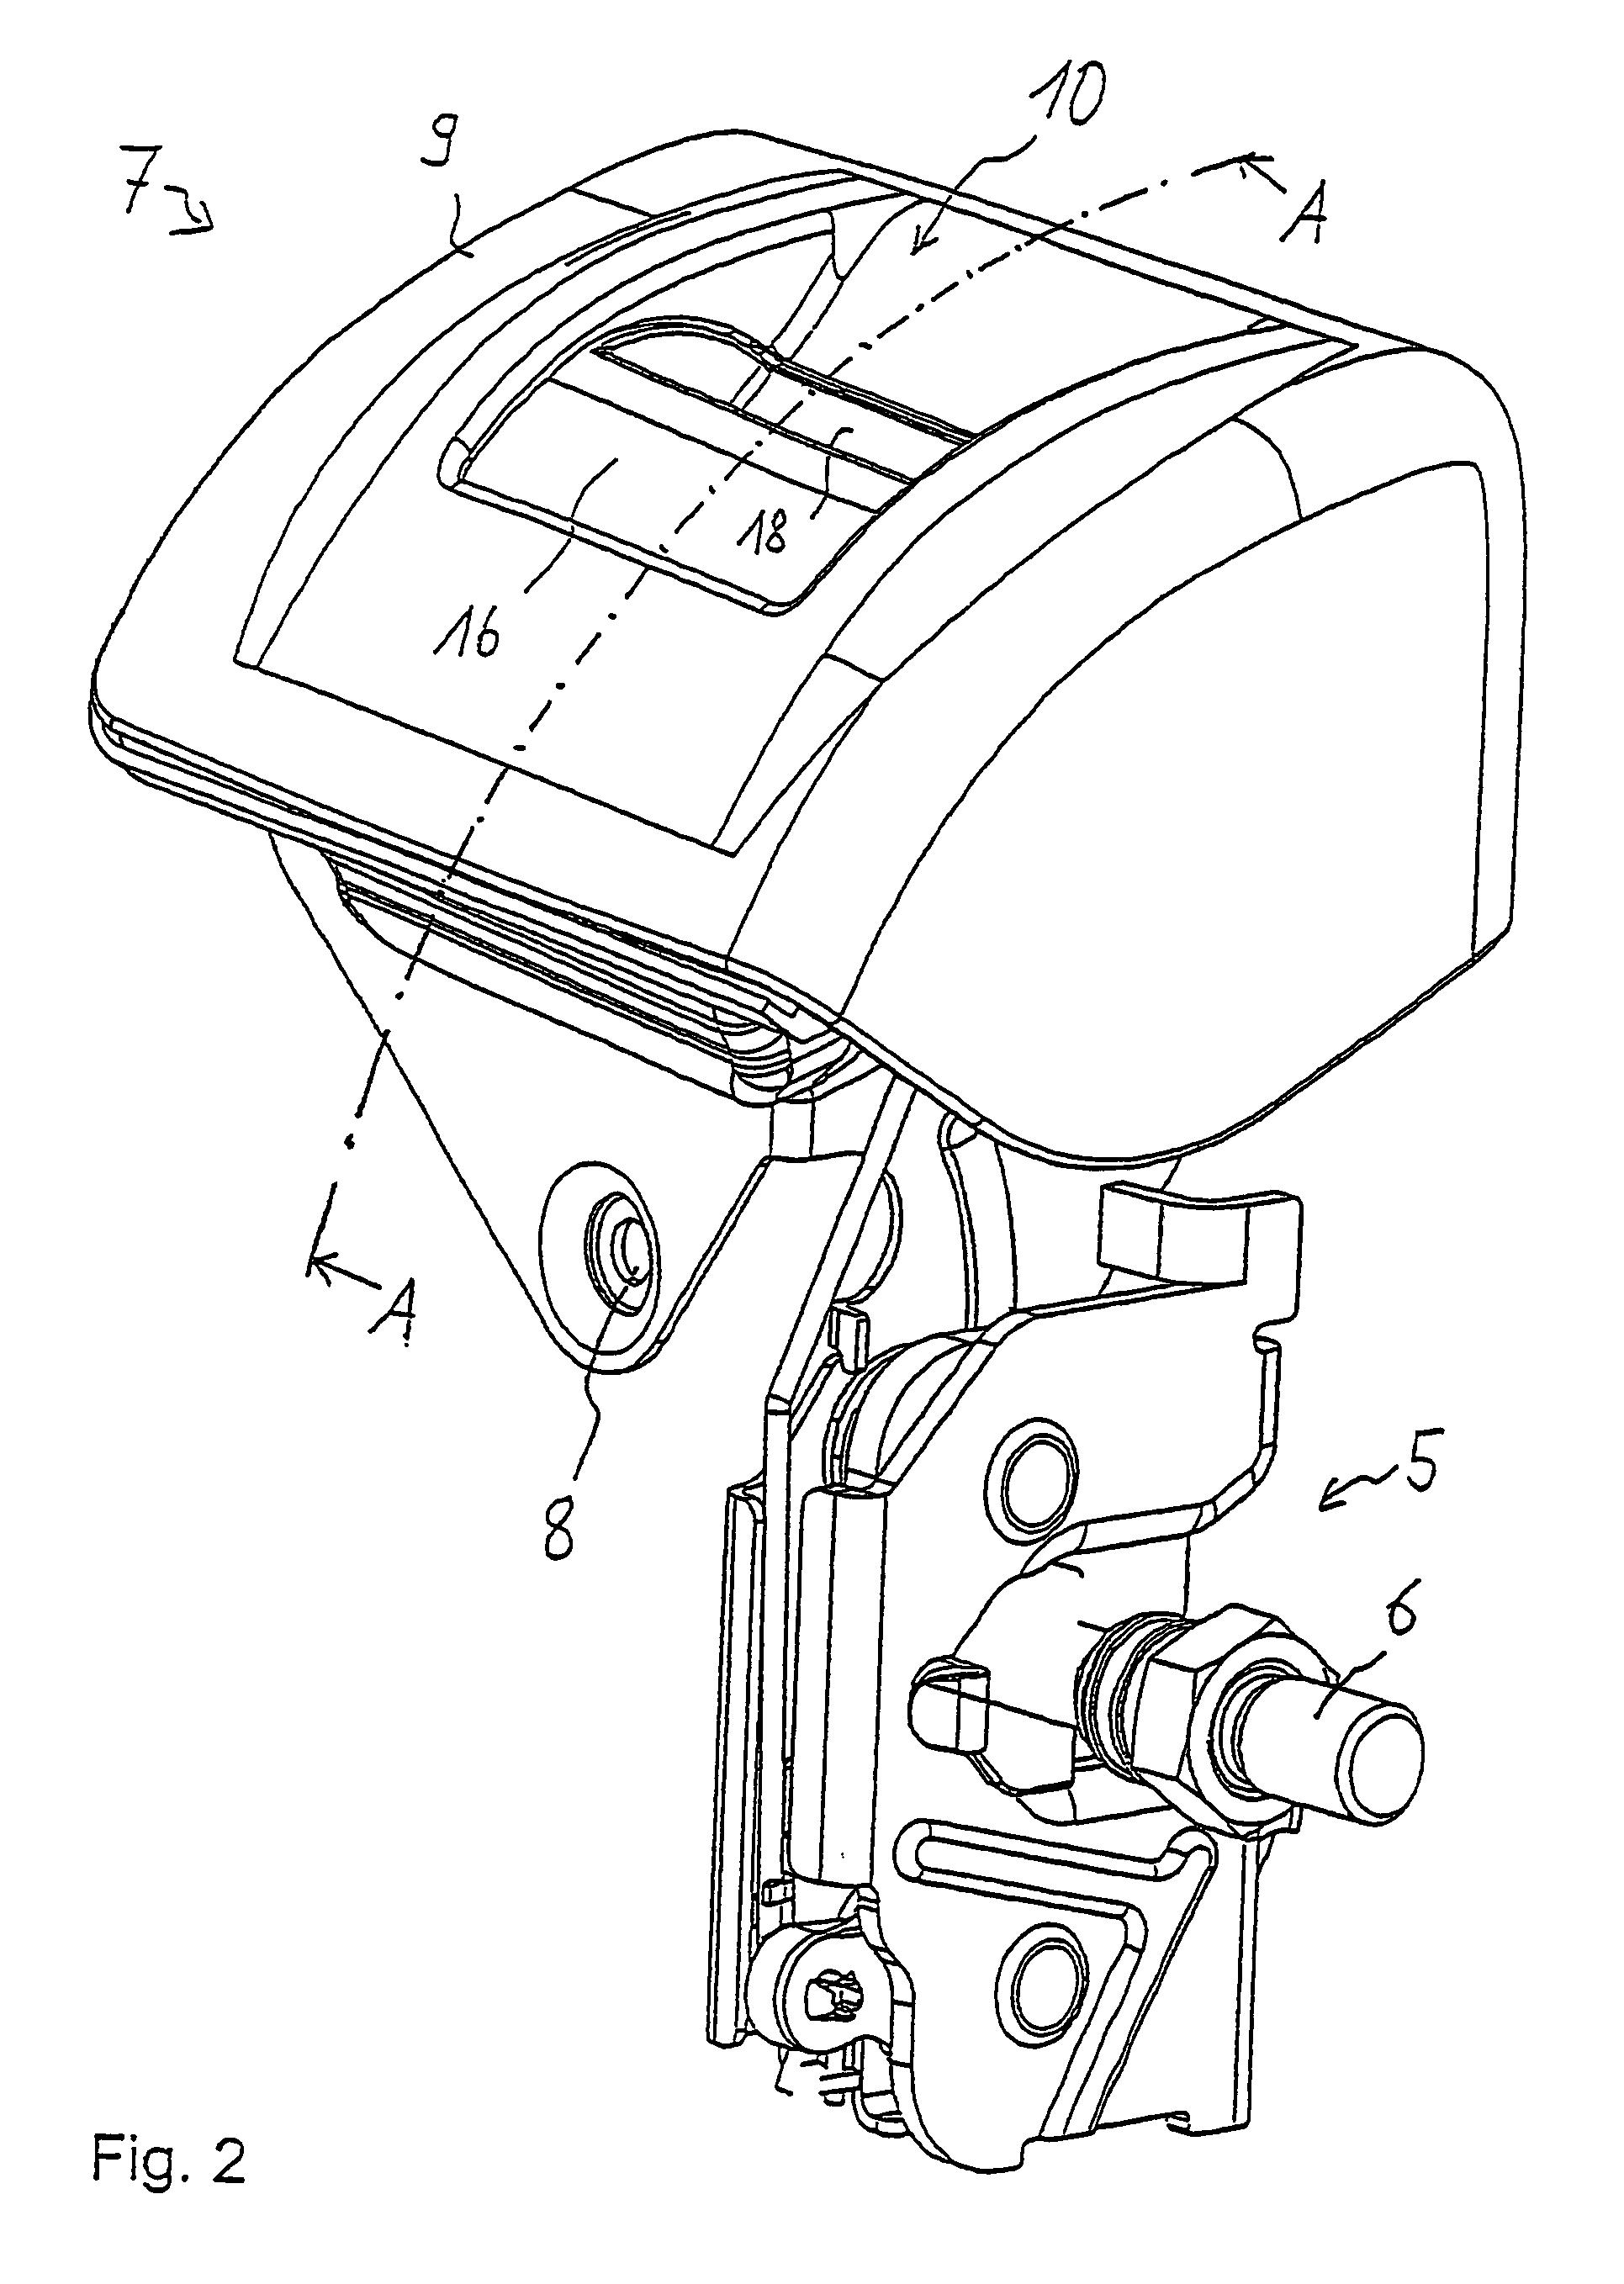 Release device for a rear seat backrest component part of a vehicle